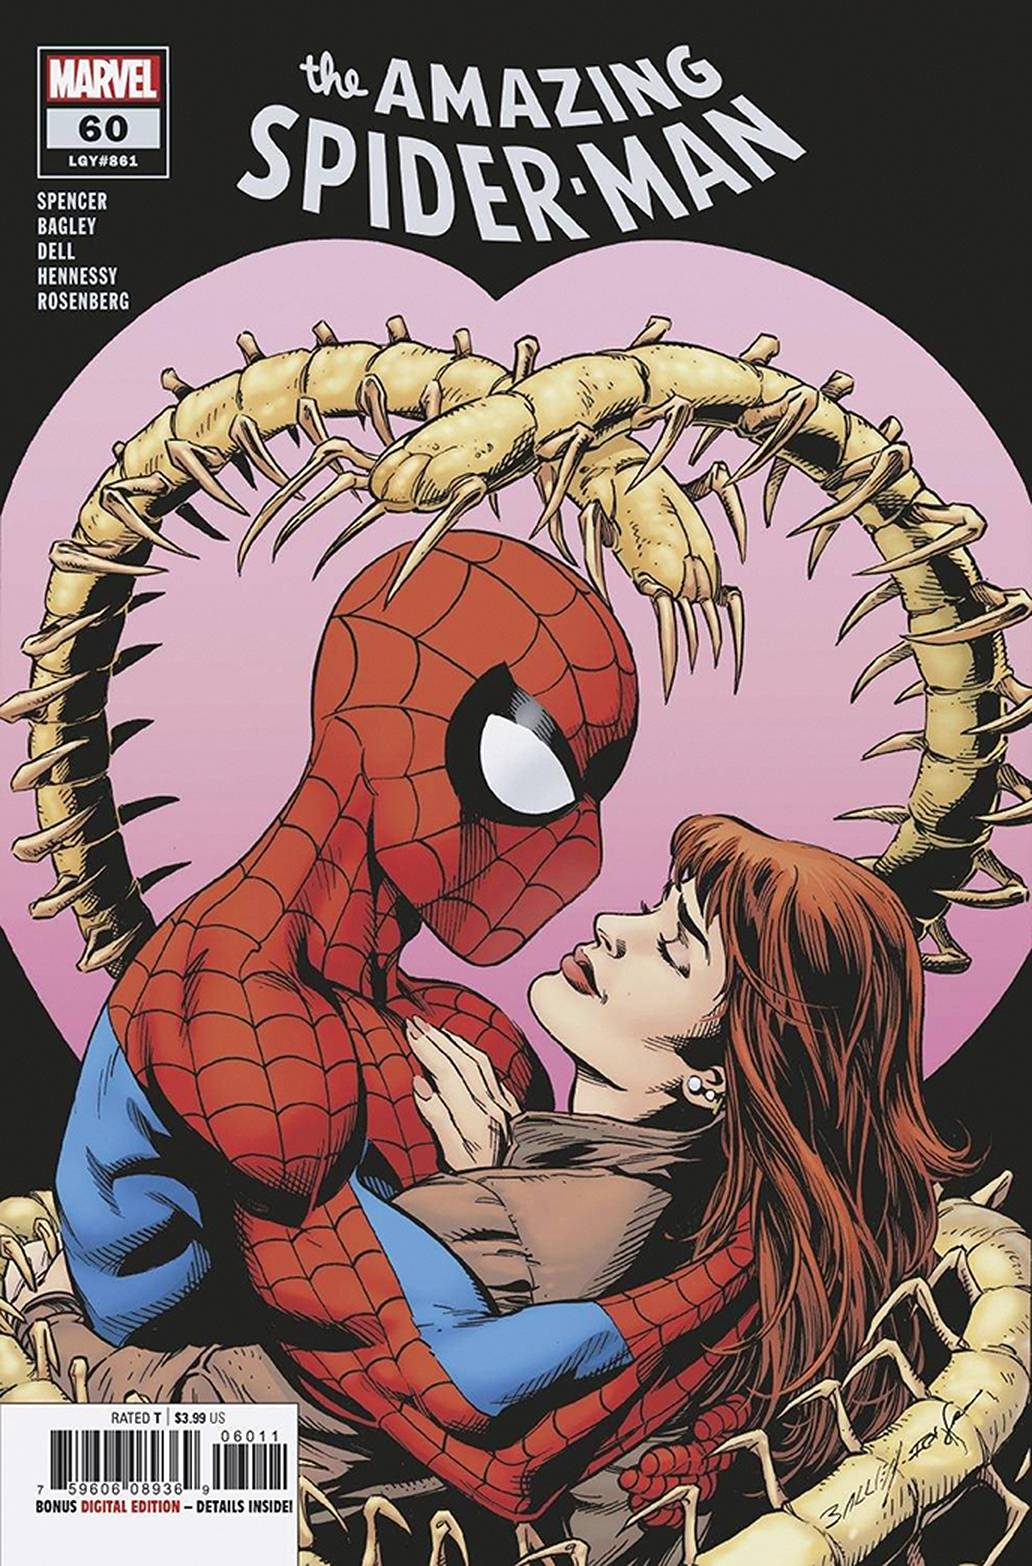 DF AMAZING SPIDERMAN #60 SPENCER SGN